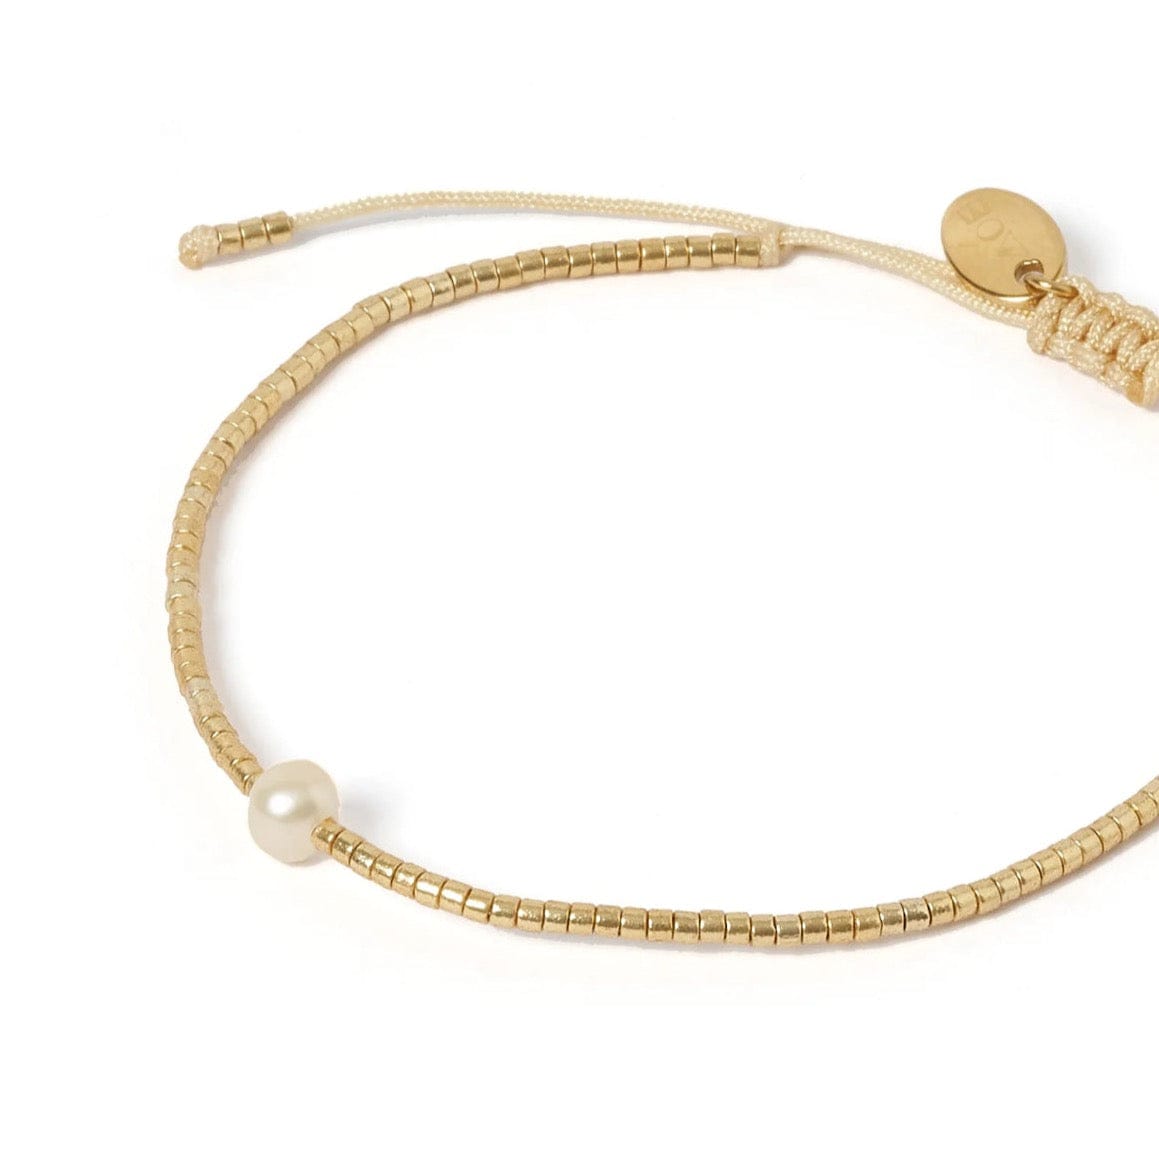 River Gold + Pearl Bracelet by Arms of Eve